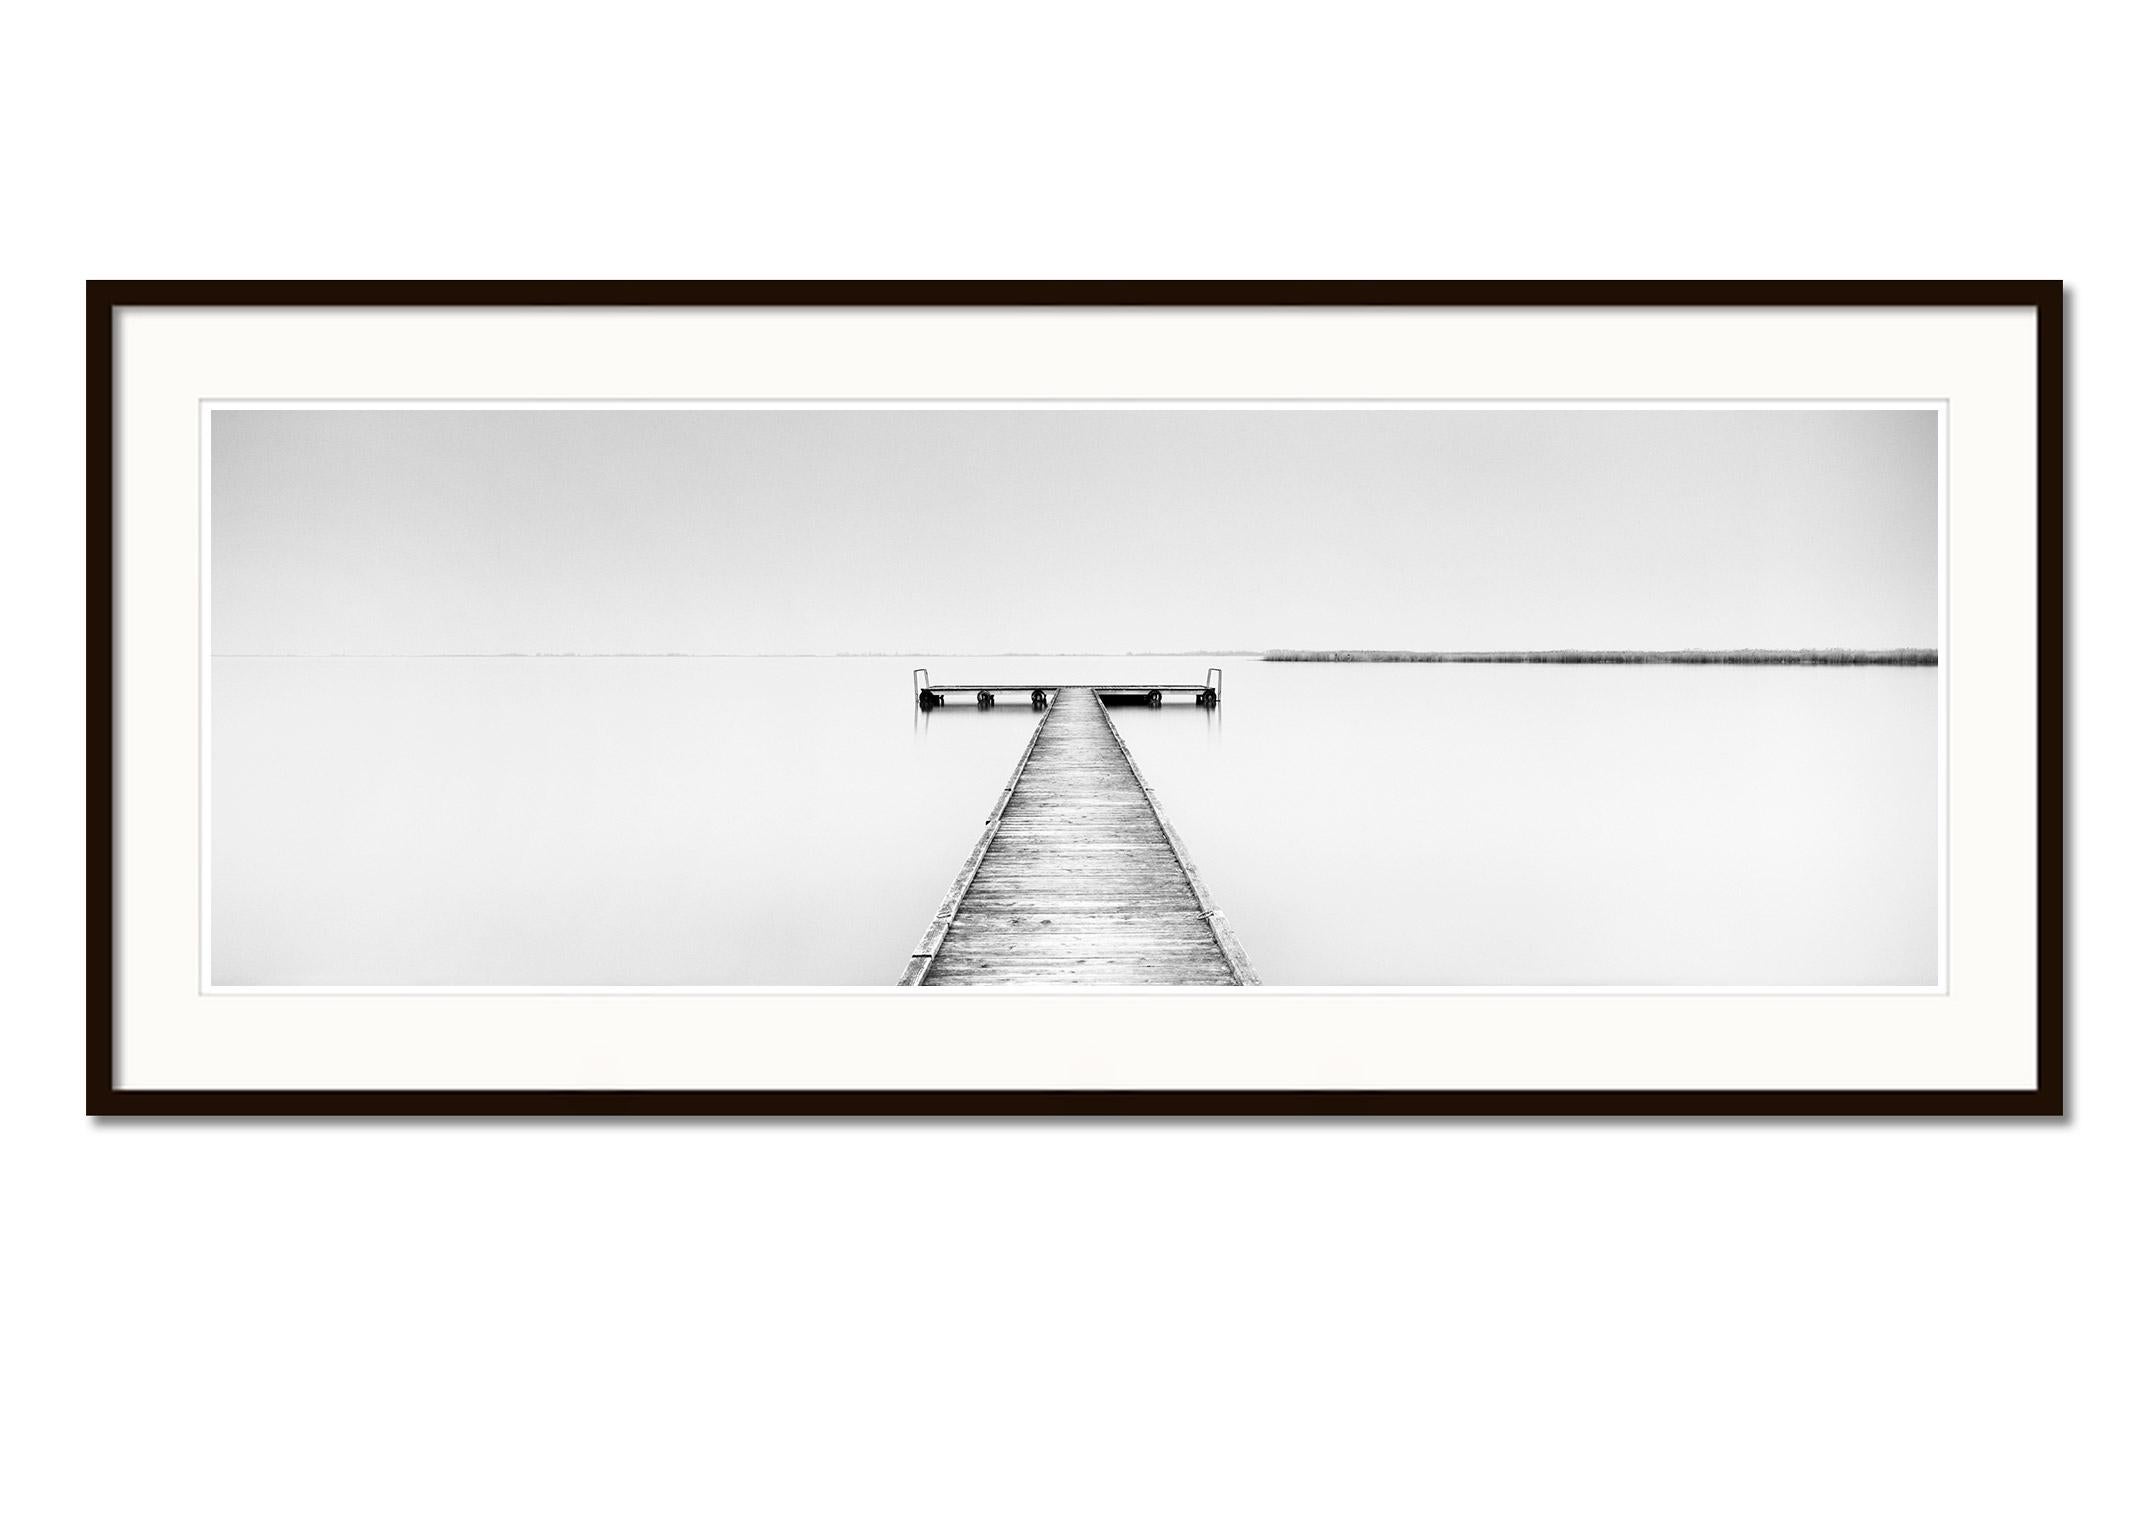 Wood Pier Panorama, minimalist black and white waterscape photography art print - Gray Landscape Photograph by Gerald Berghammer